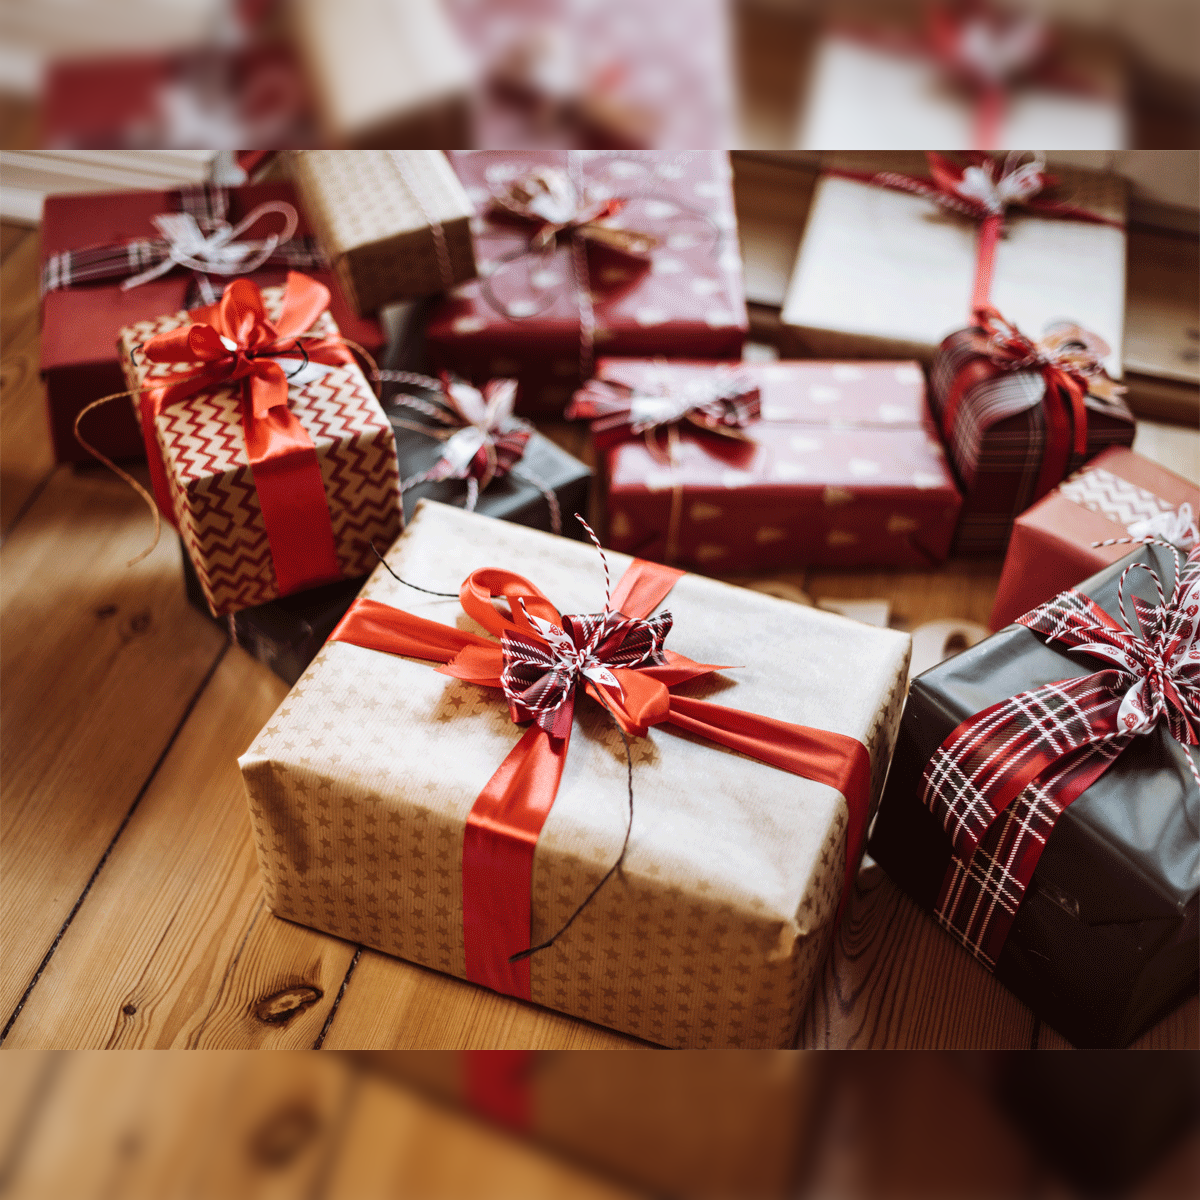 Are Employee Gifts Taxable Or Not? - Market Business News